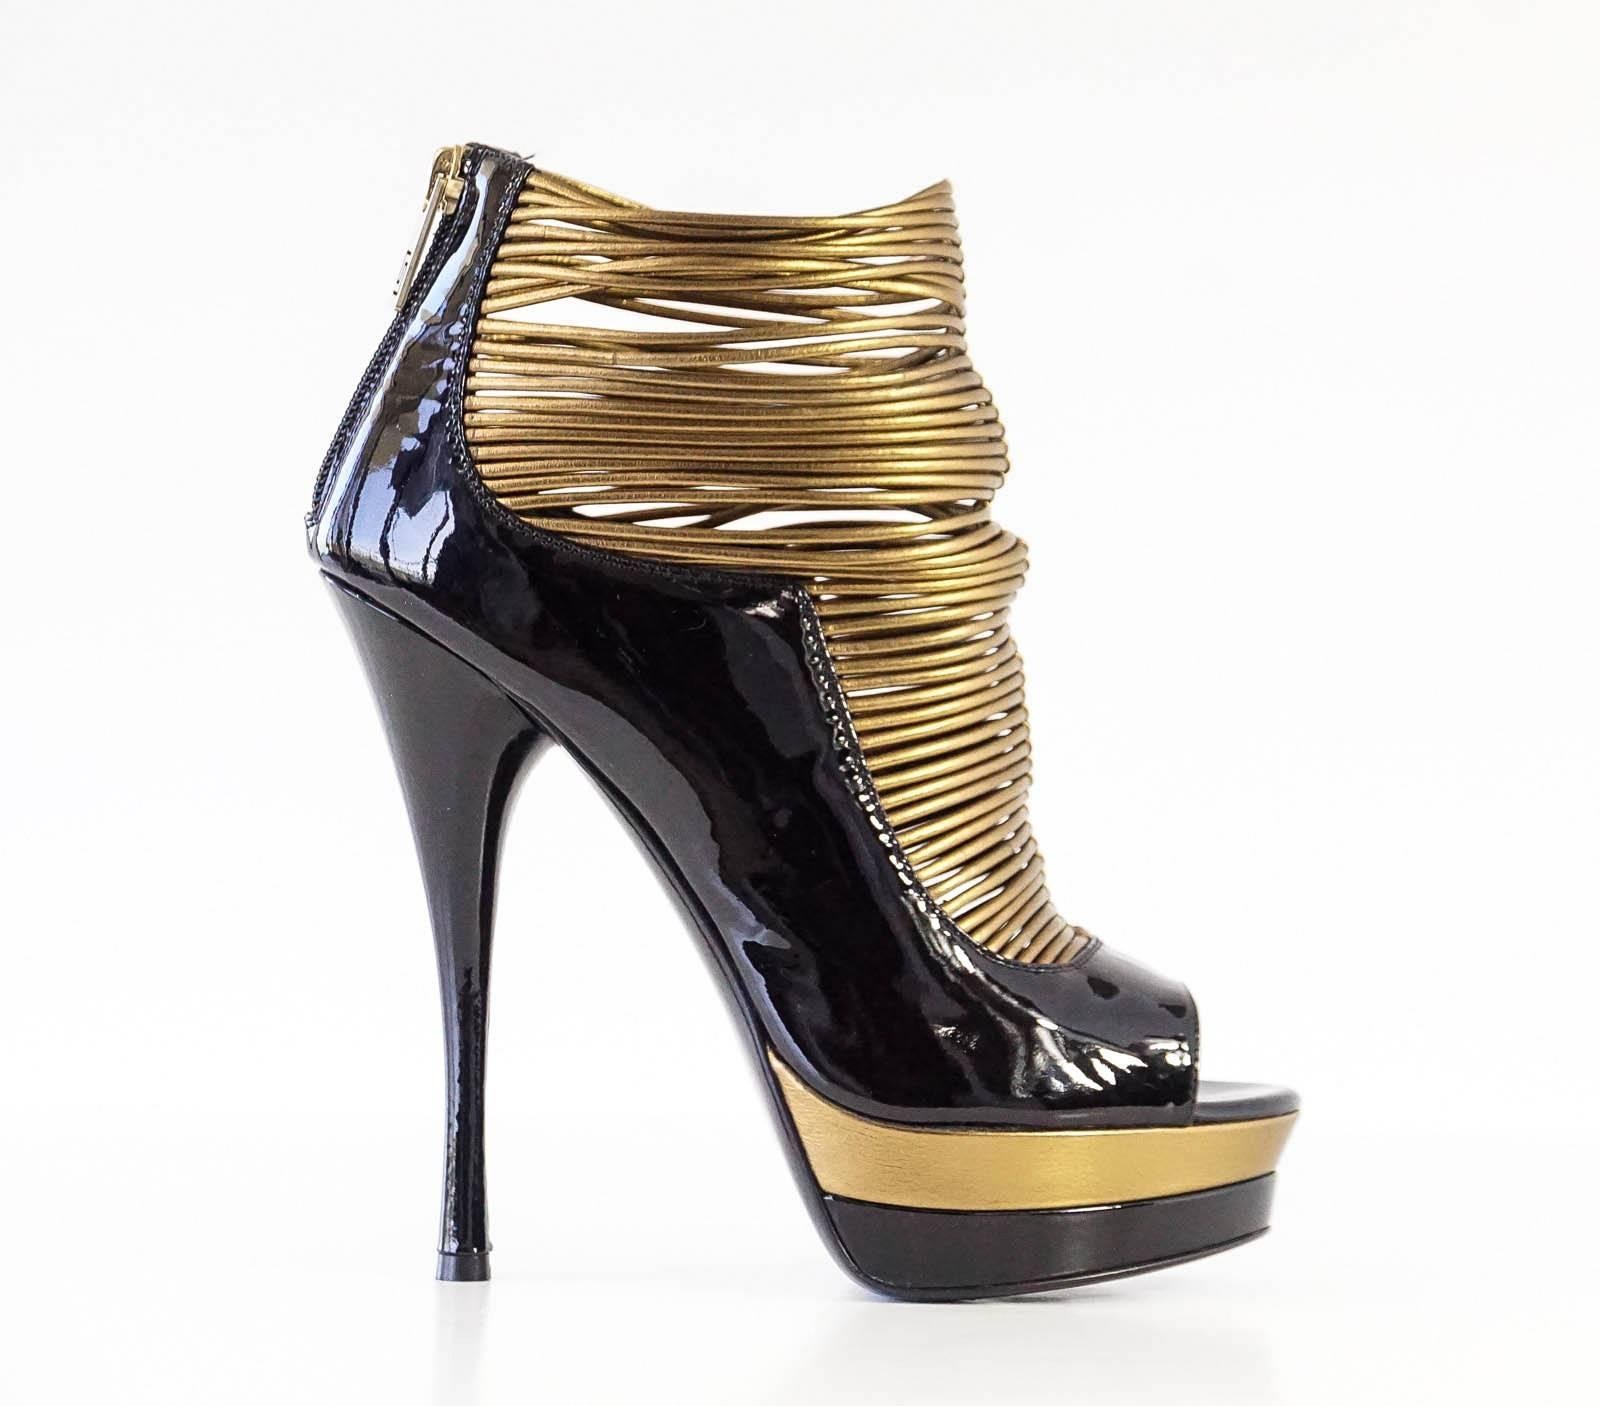 Guaranteed authentic VERSACE dramatic gold and black patent leather platform bootie style shoe. 
Peeptoe black patent leather bootie with thin rolled gold leather bands up the front foot.
Platform is accentuated in both both black and gold.
Rear zip